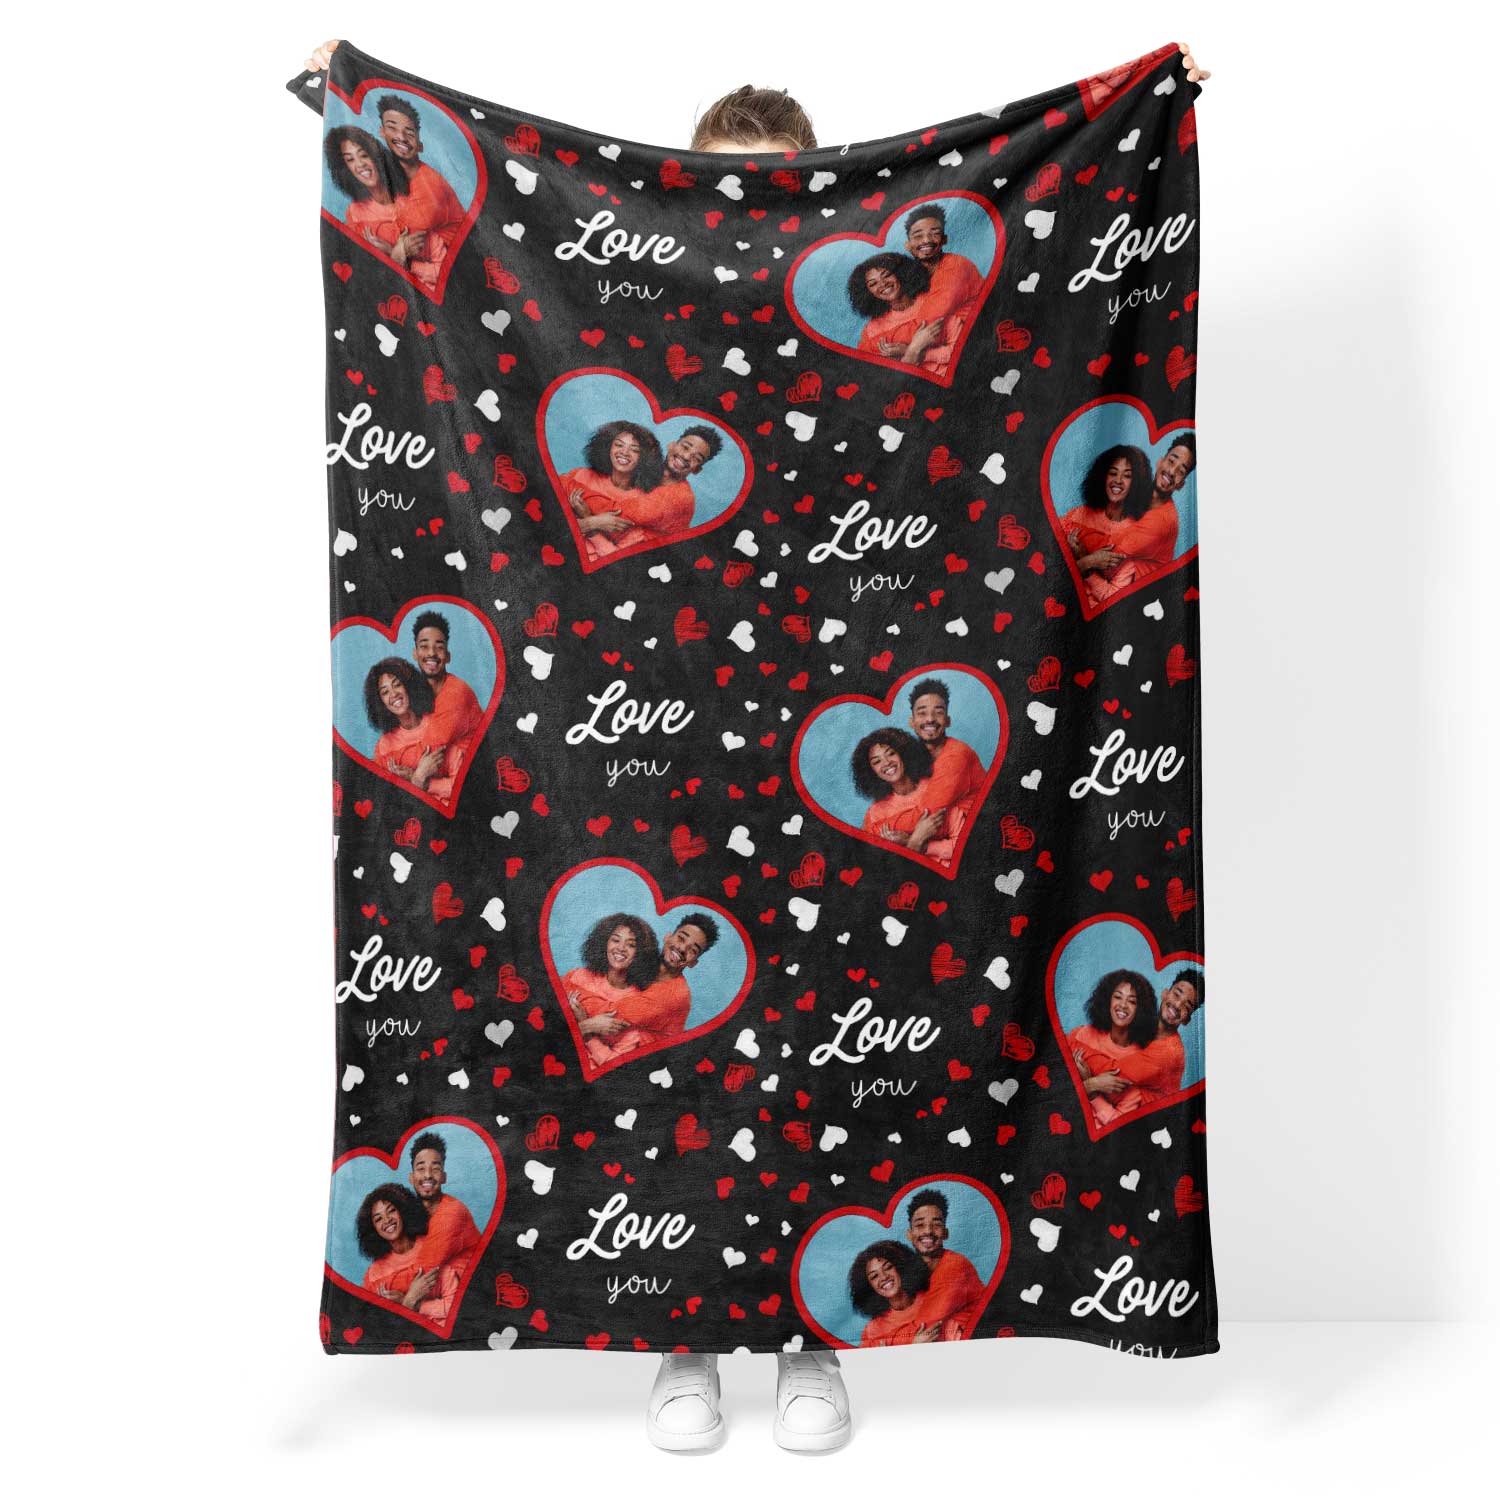 Love You Collage Personalised Blanket